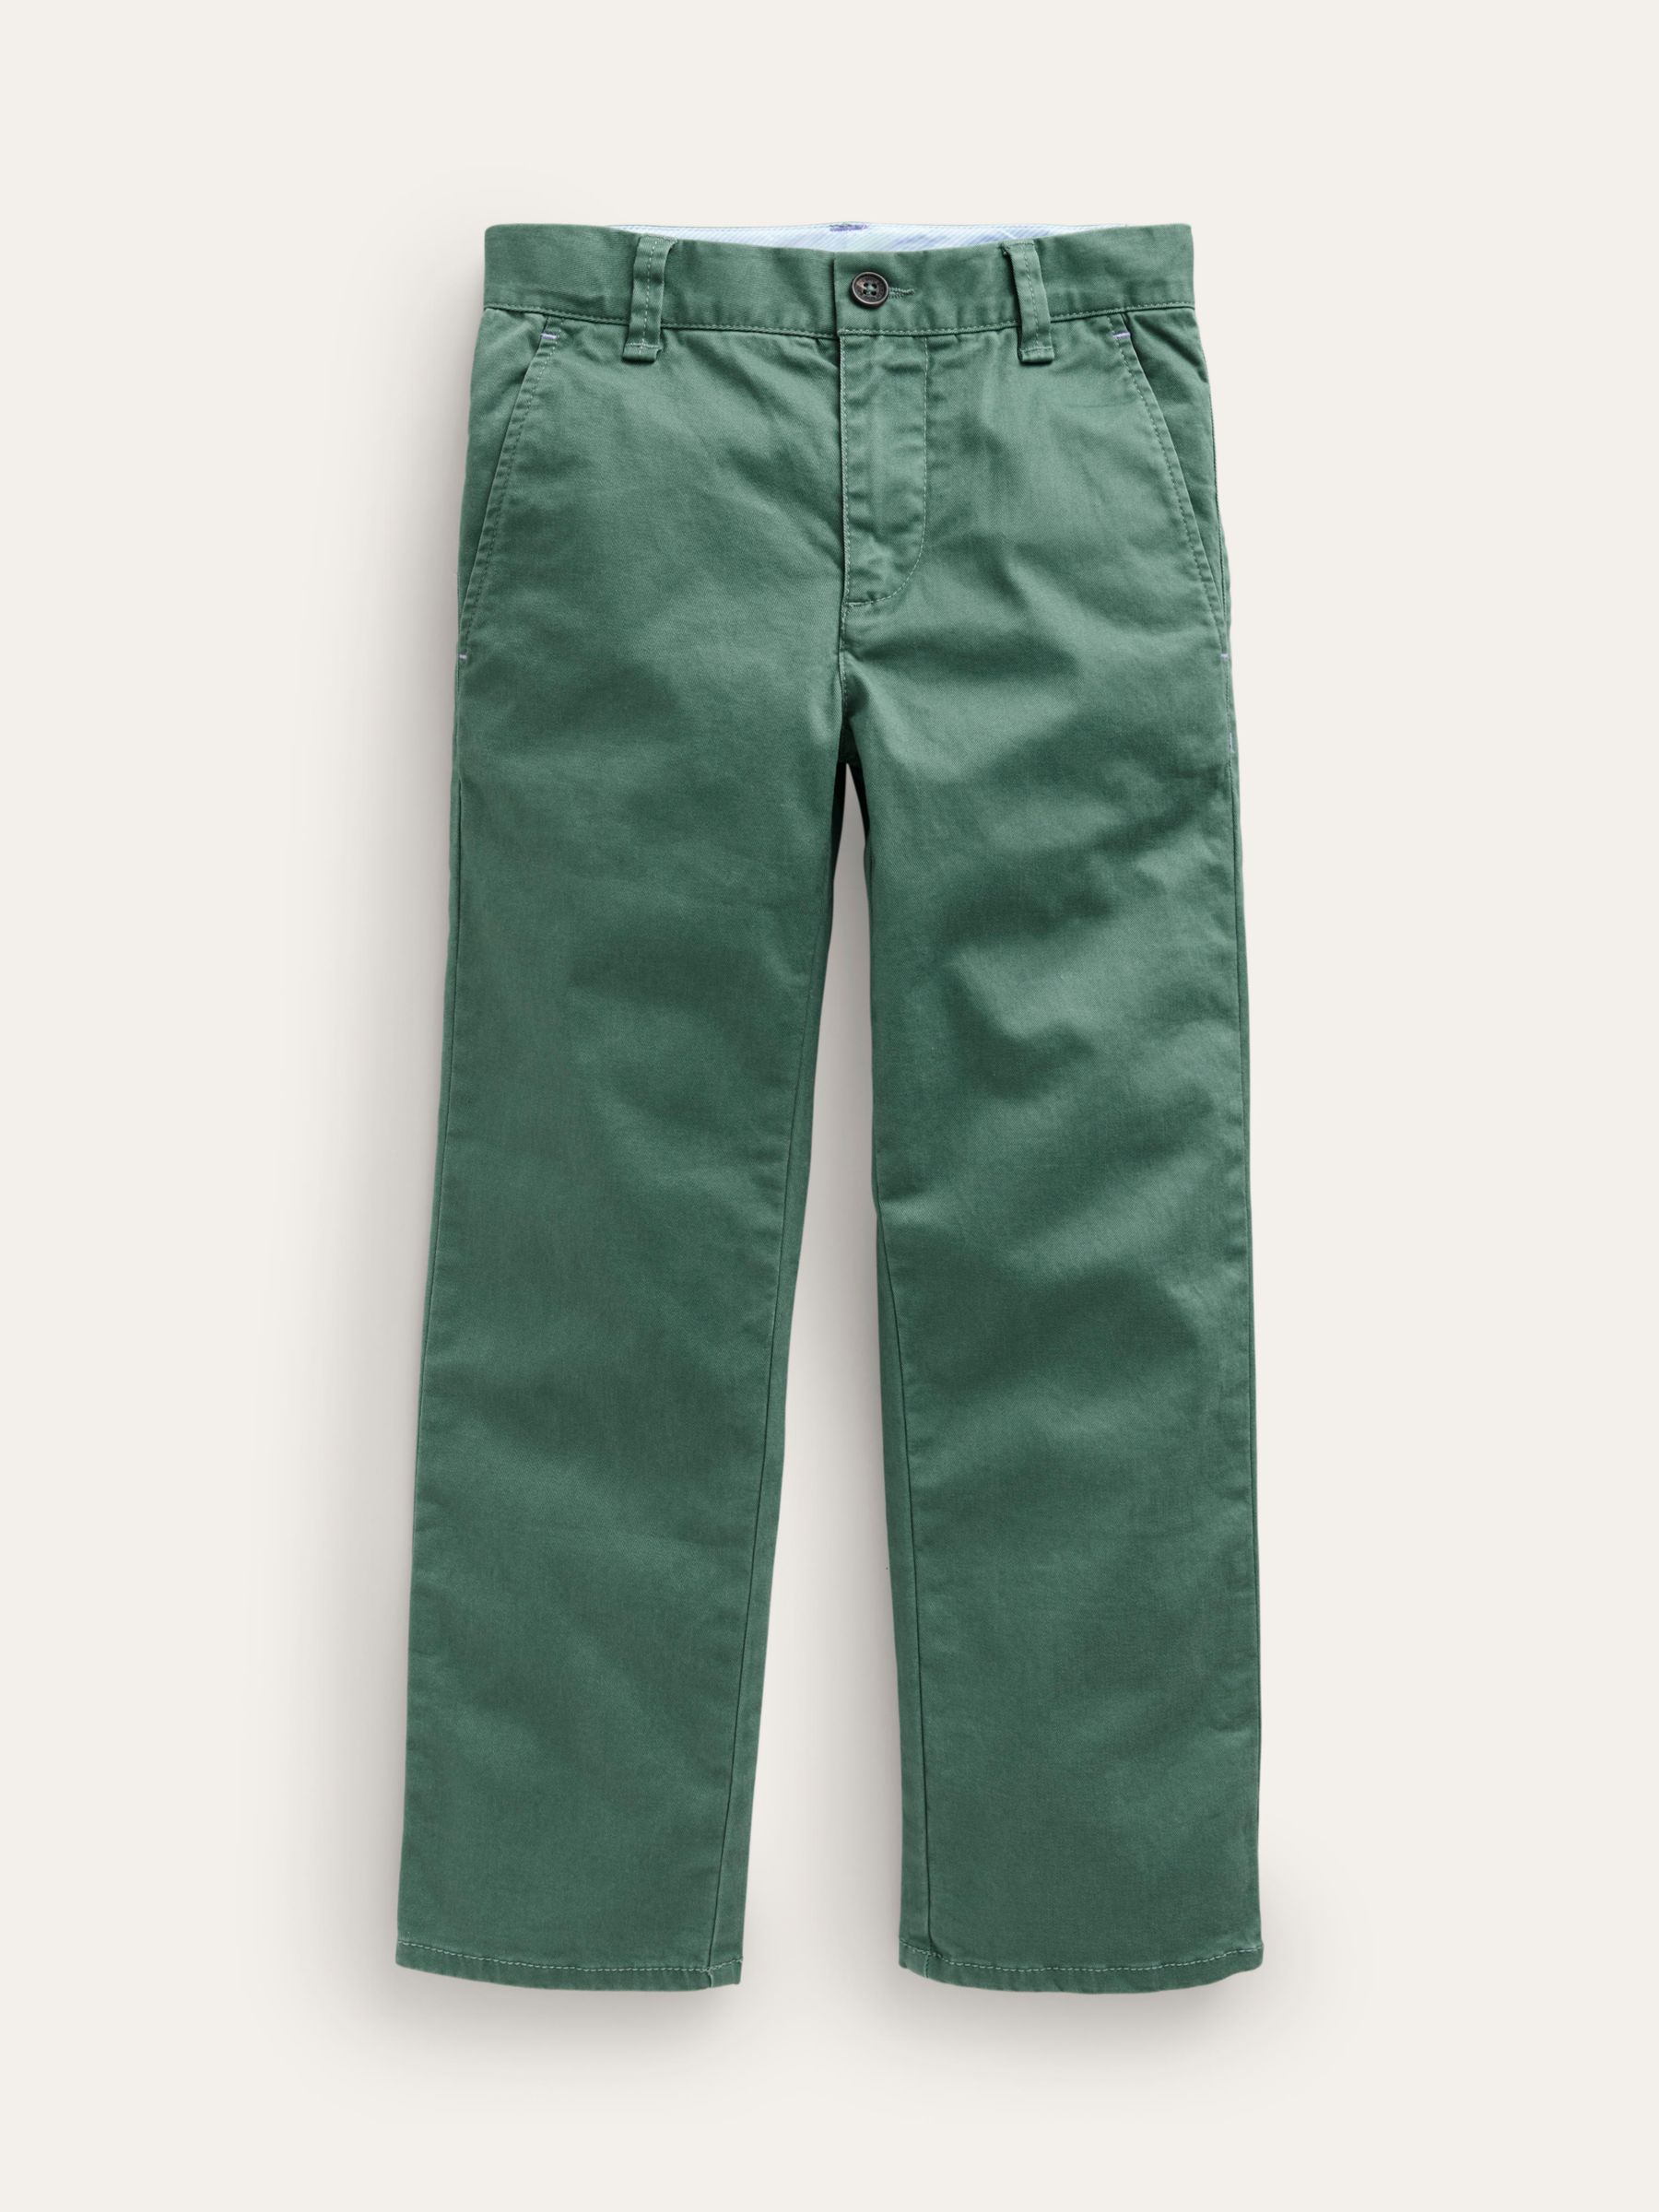 Mini Boden Kids' Classic Relax Fit Chinos, Spruce Green at John Lewis ...